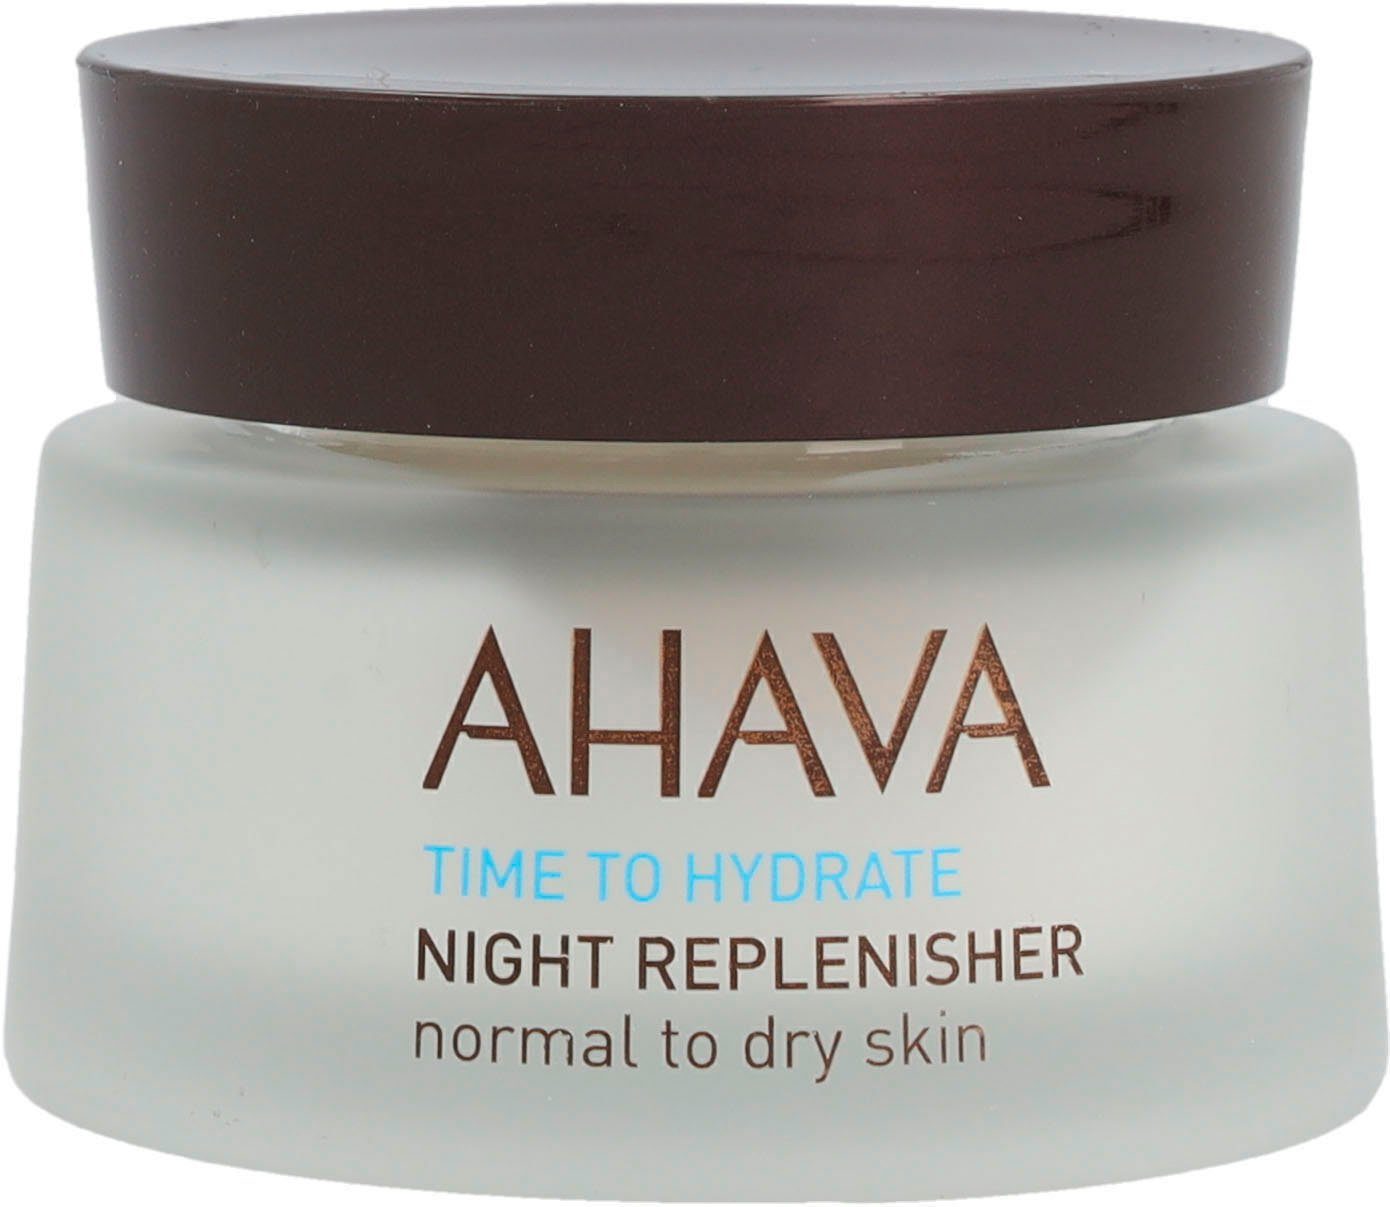 AHAVA Nachtcreme Hydrate Normal Night Time To Replenisher Dry